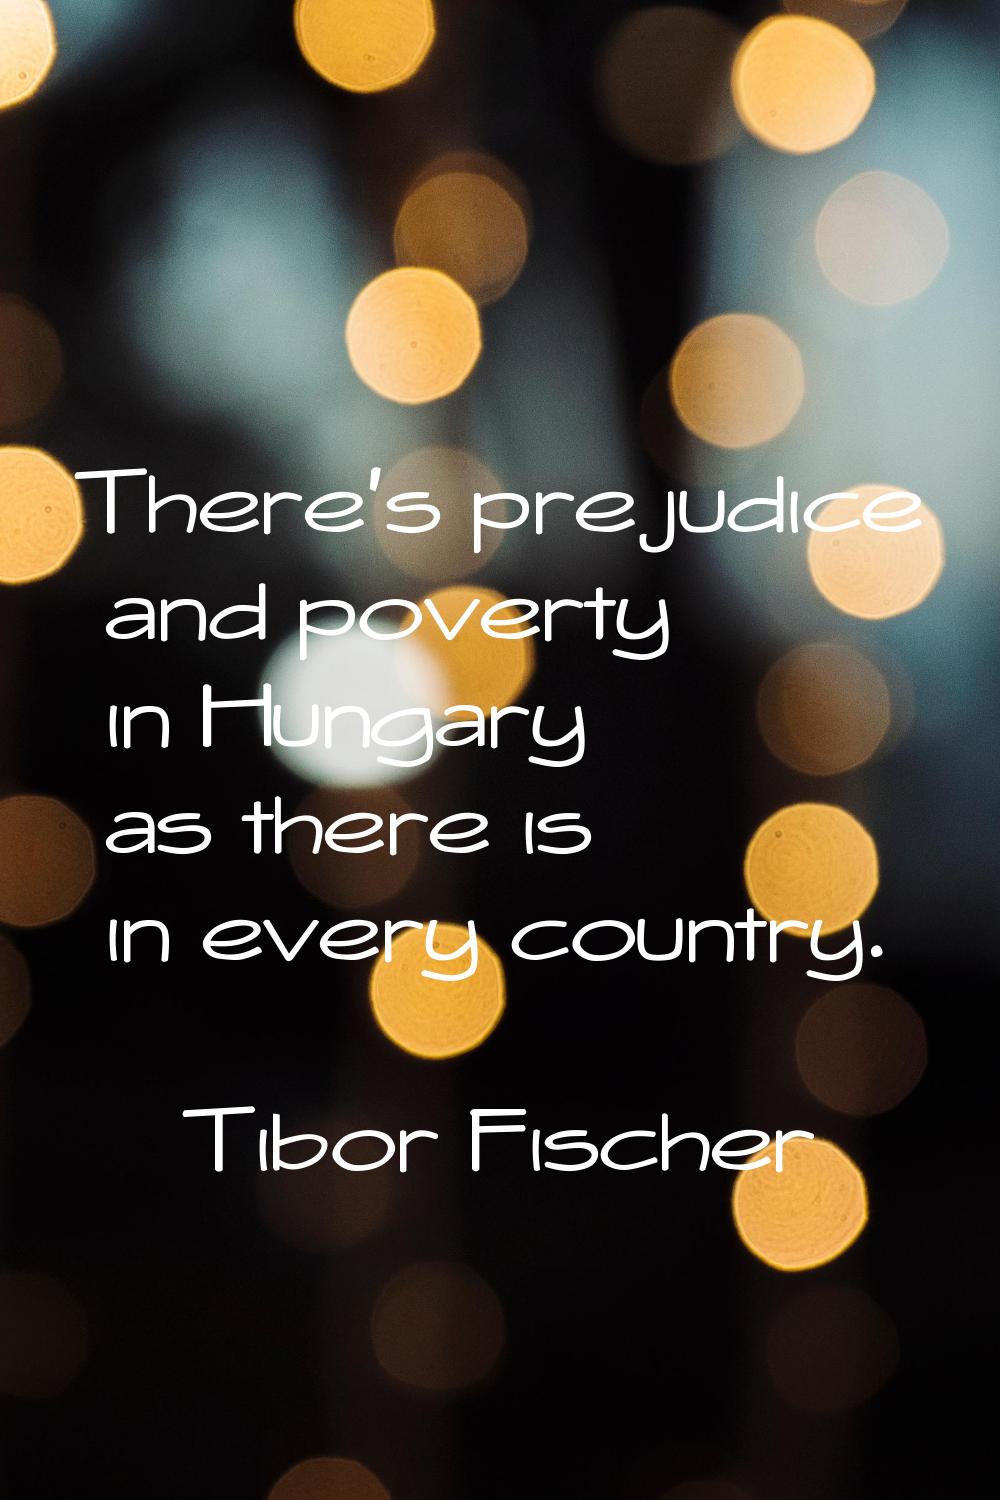 There's prejudice and poverty in Hungary as there is in every country.